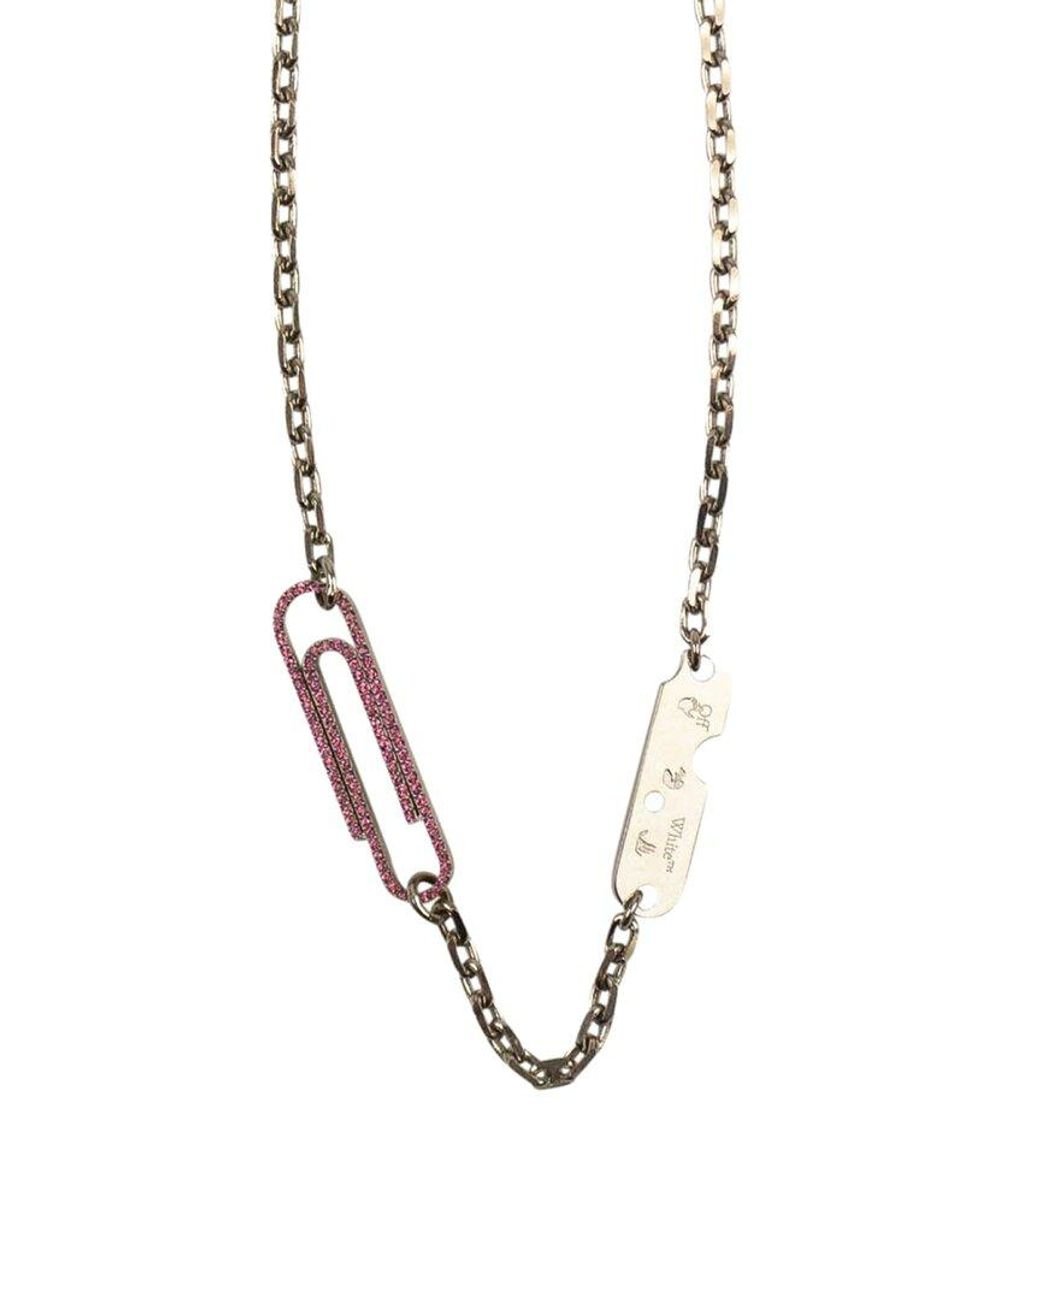 Off-White c/o Virgil Abloh Strass Paperclip Necklace in Metallic